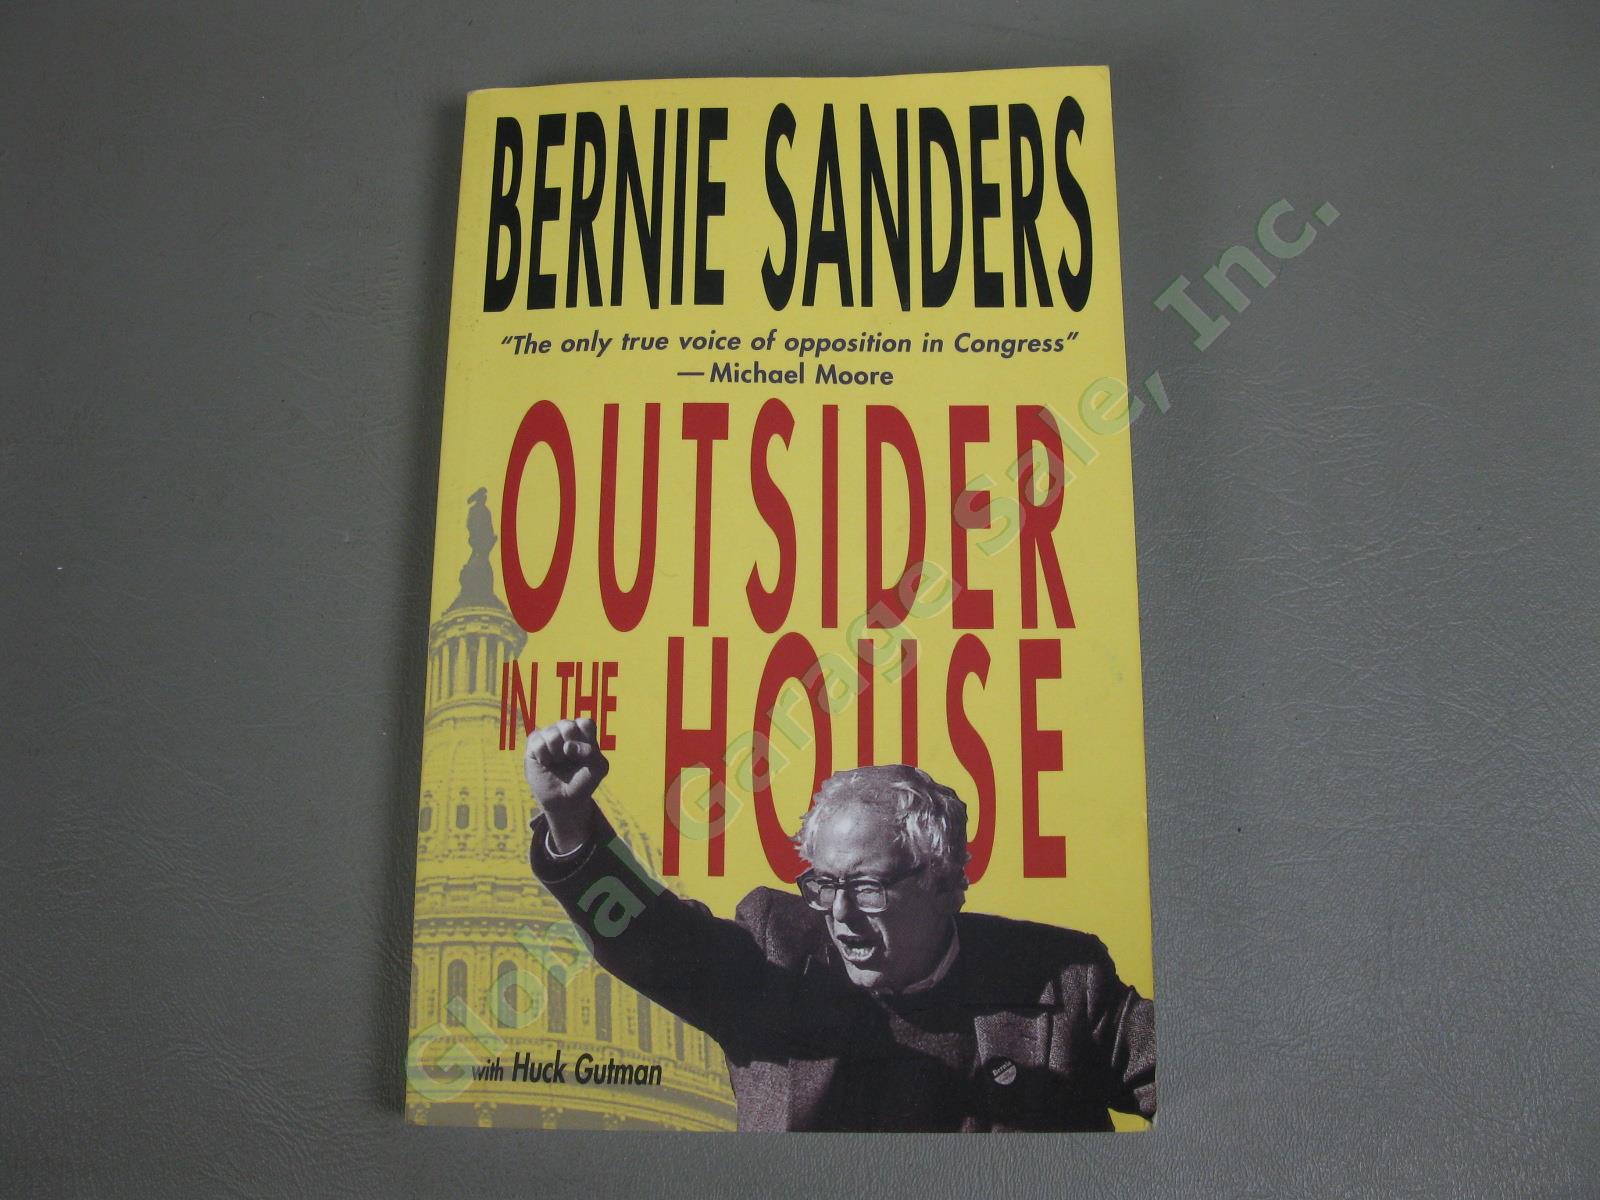 Bernie Sanders Hand Signed Autographed 1st Edition Book Outsider In The House NR